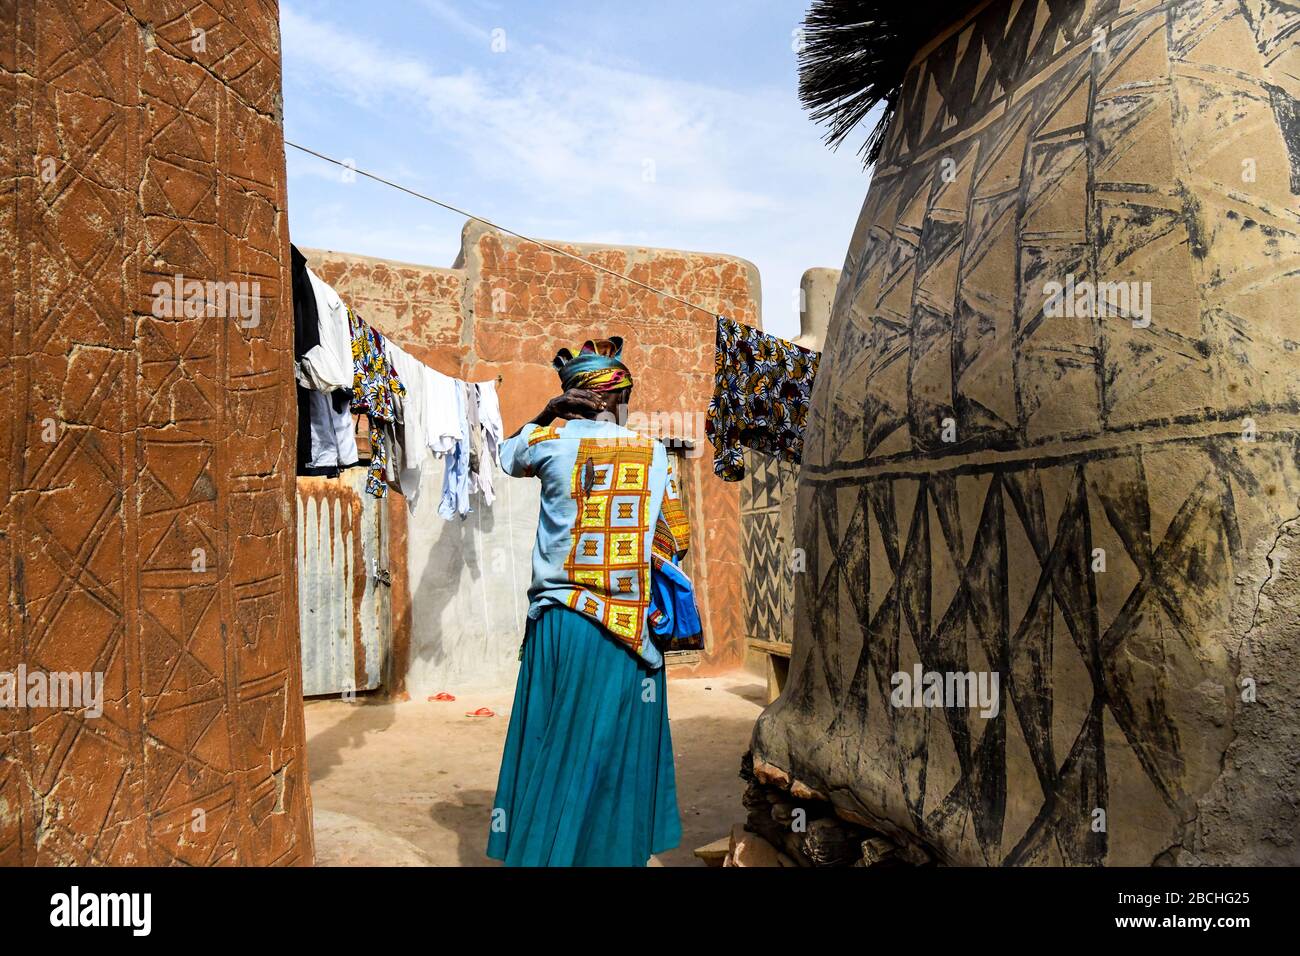 Africa, Burkina Faso, Pô region, Tiebele. Cityscape view of the royal court village in Tiebele.  A woman walks to hang some laundry Stock Photo